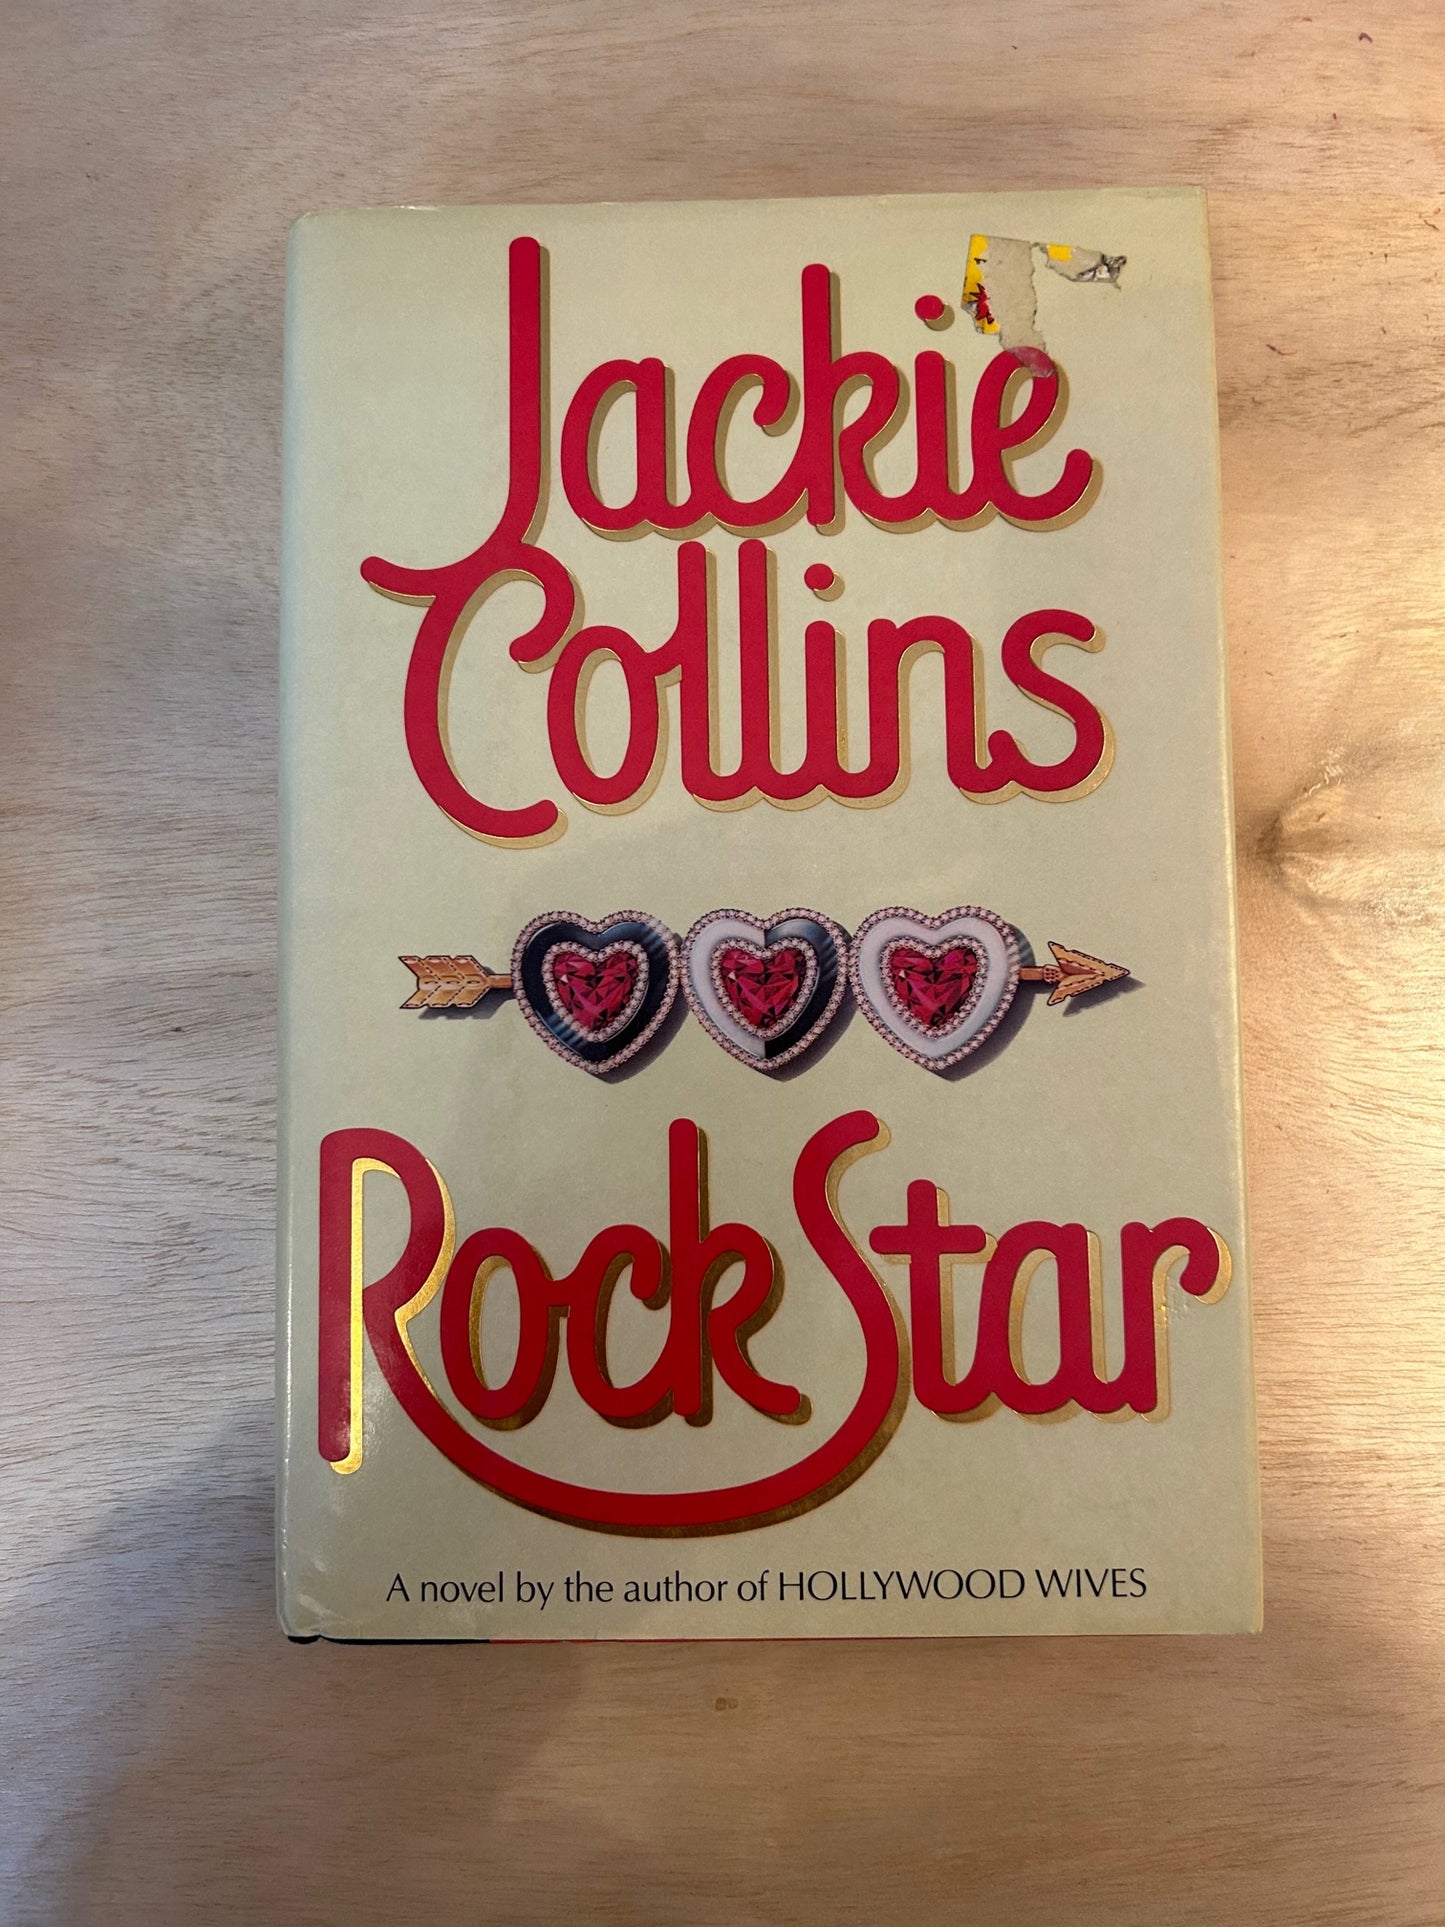 Rockstar by Jackie Collins (A Used Hardcover)